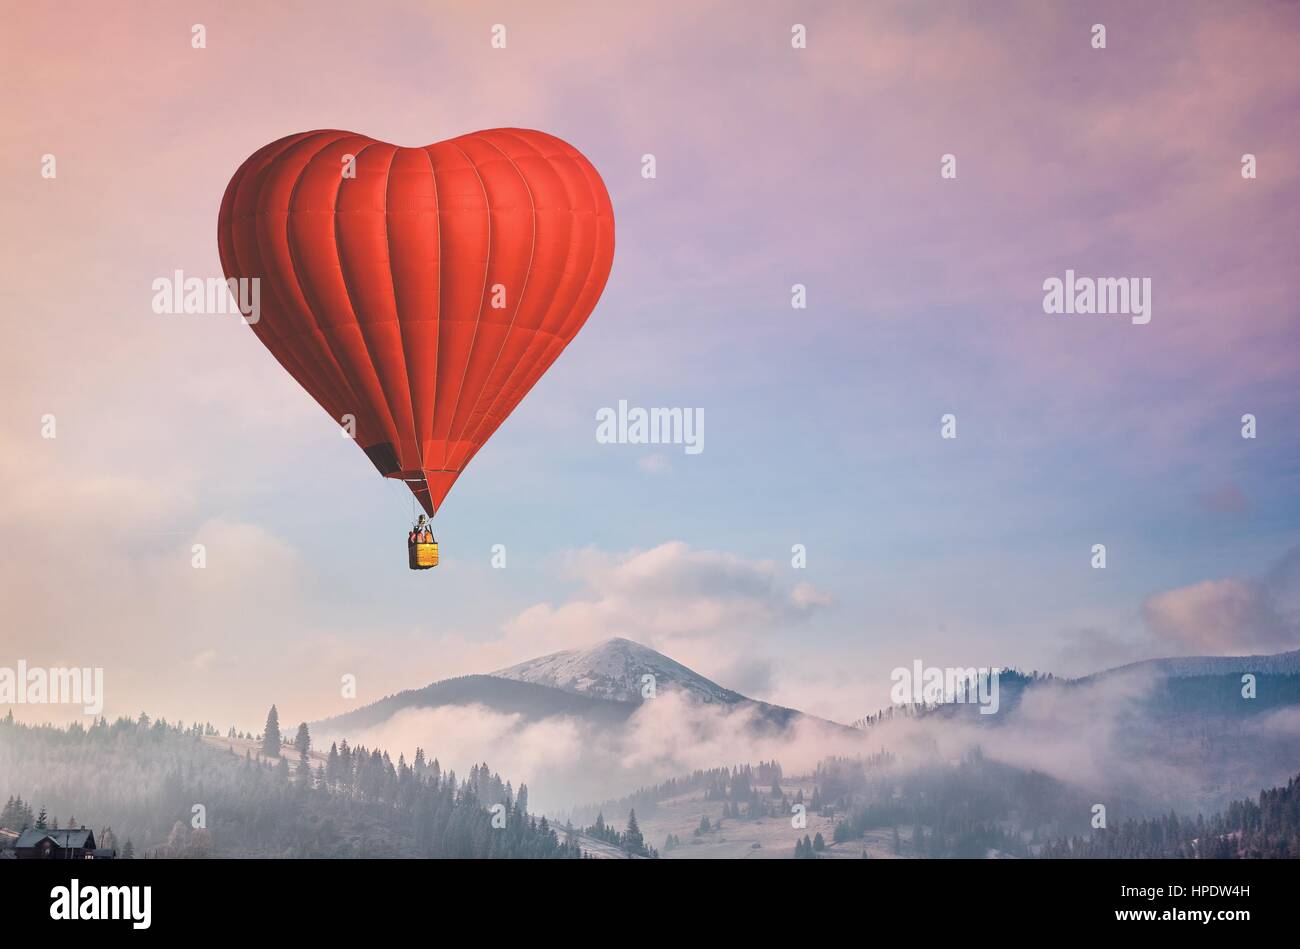 Red air balloon heart shape against blue and pink pastel sky in a sunny bright morning. Foggy mountains in the background. Romantic postcard backgroun Stock Photo